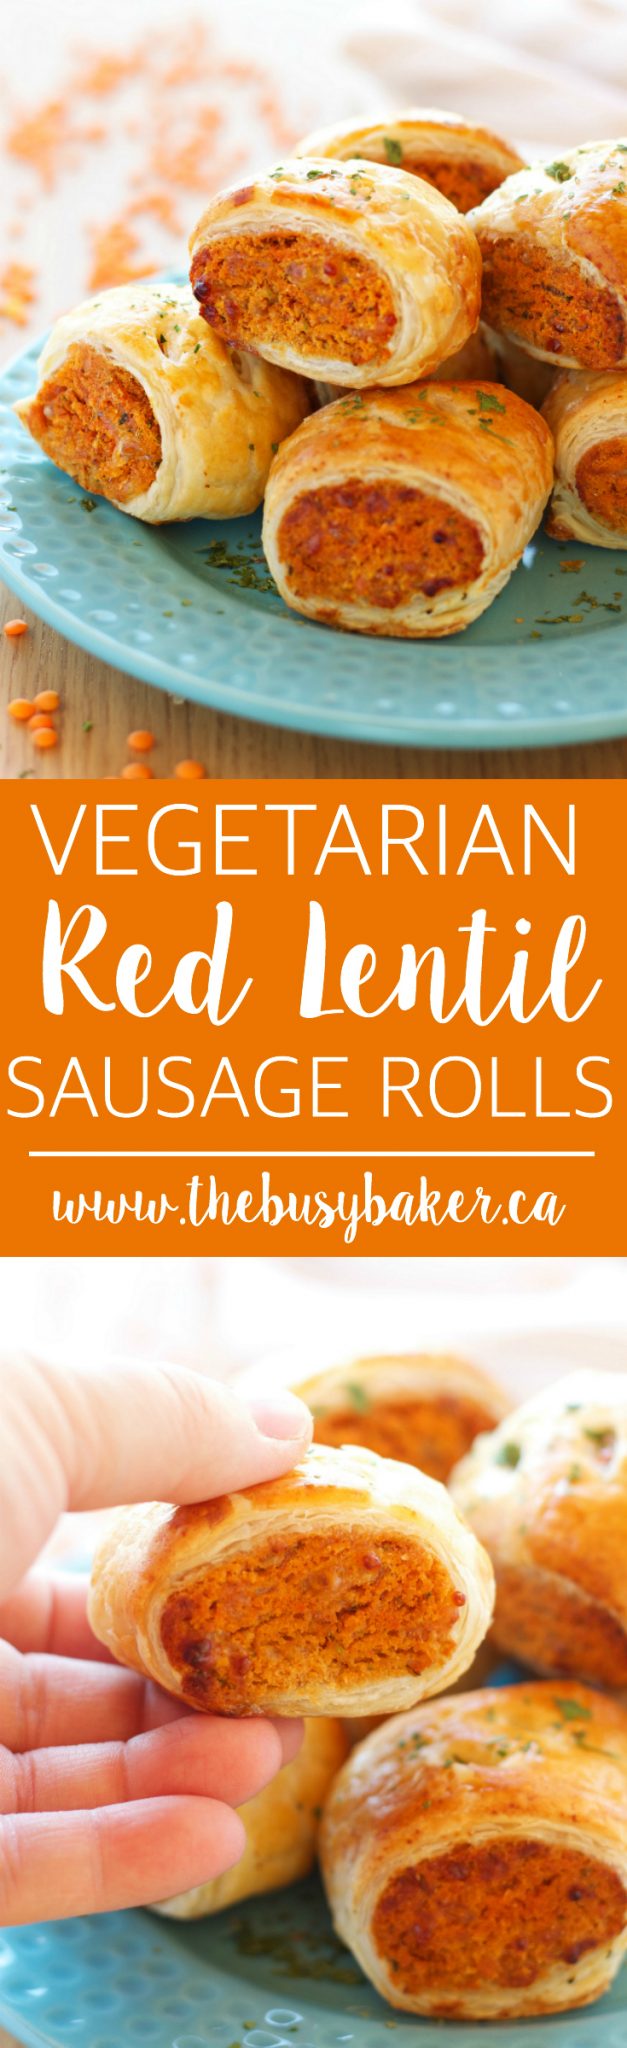 These Vegetarian Red Lentil Sausage Rolls are the perfect vegetarian appetizer! They're easy to make and you won't even miss the meat! thebusybaker.ca via @busybakerblog